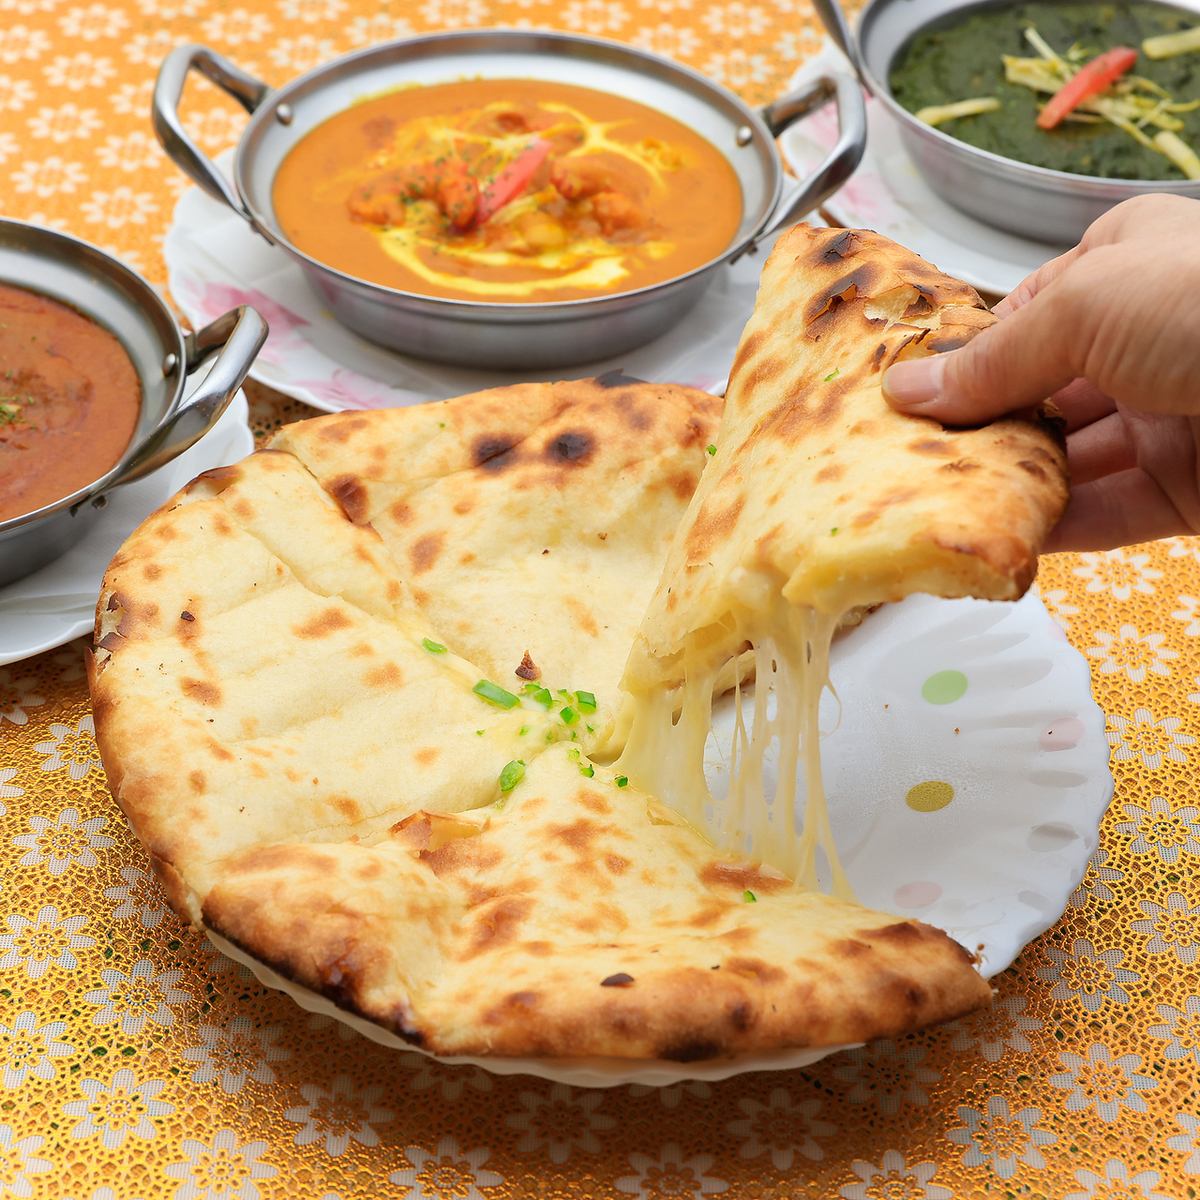 Authentic Indian cuisine prepared by top-notch chefs.Freshly baked big naan is excellent!